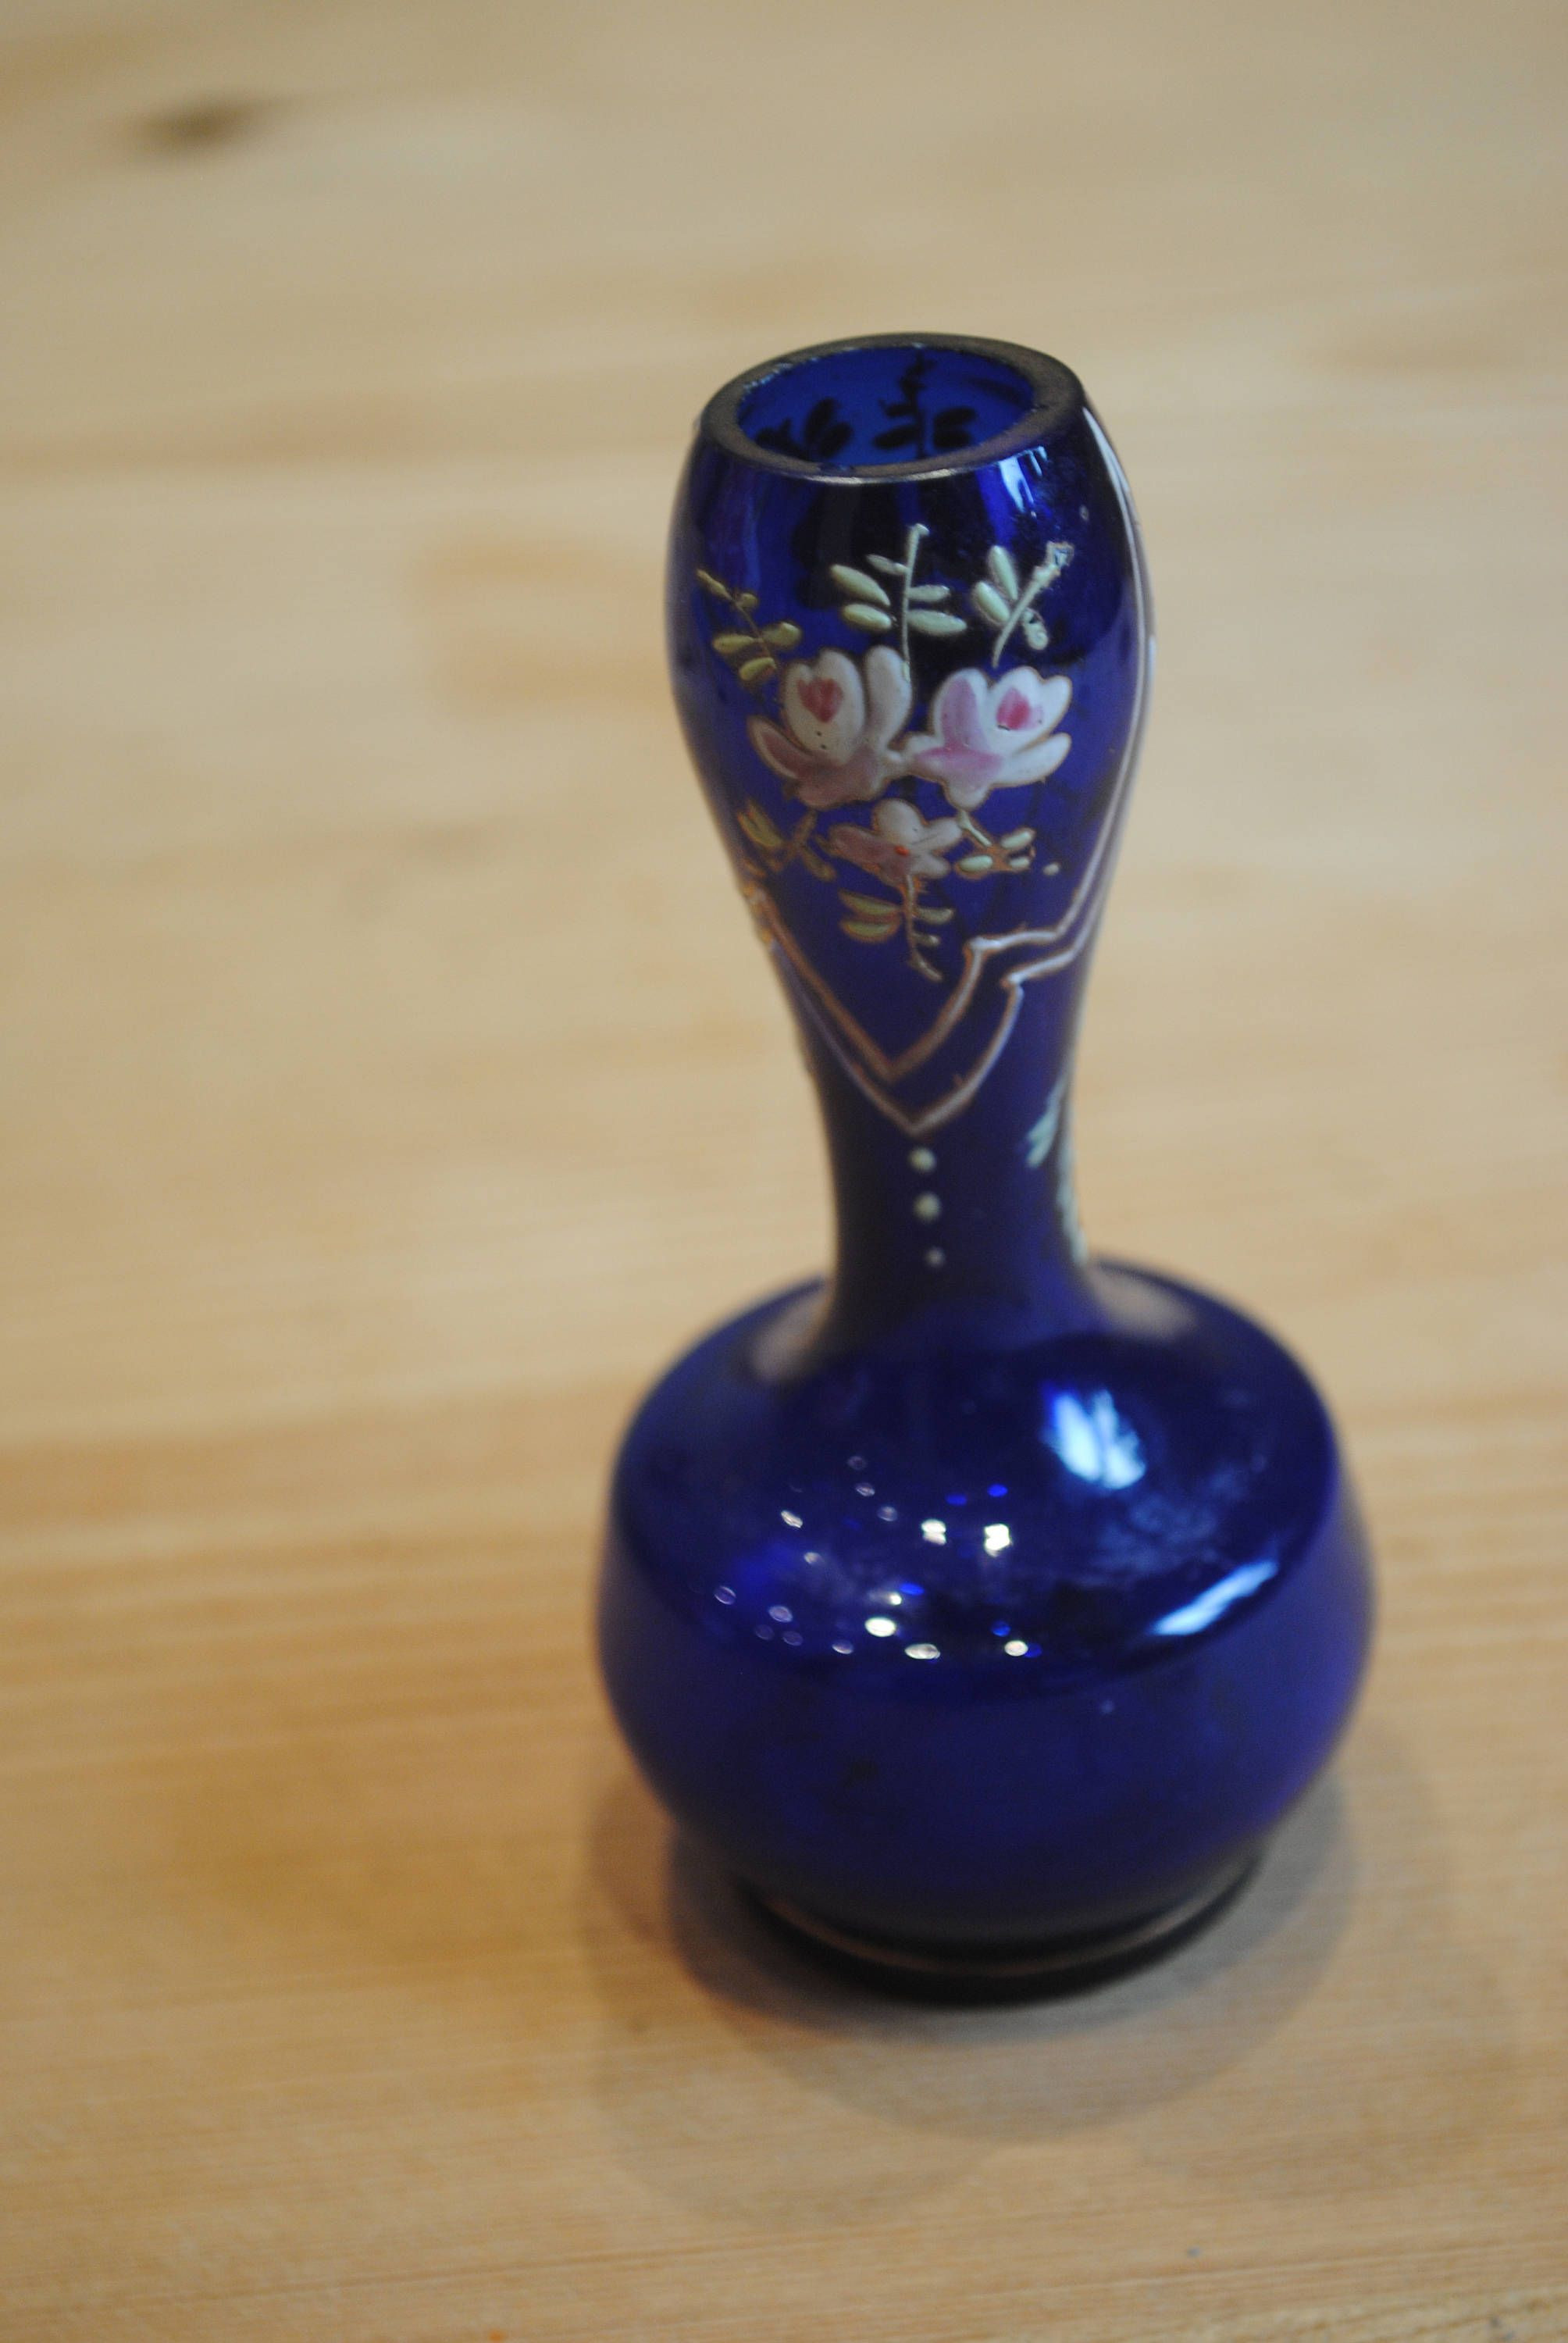 26 Nice Vintage Red Glass Bud Vase 2024 free download vintage red glass bud vase of venetain glass bud vase in cobalt with hand painted flowers and regarding glass ac2b7 vintage bohemian cobalt blue glass bud vase with gilt hand painted flowers